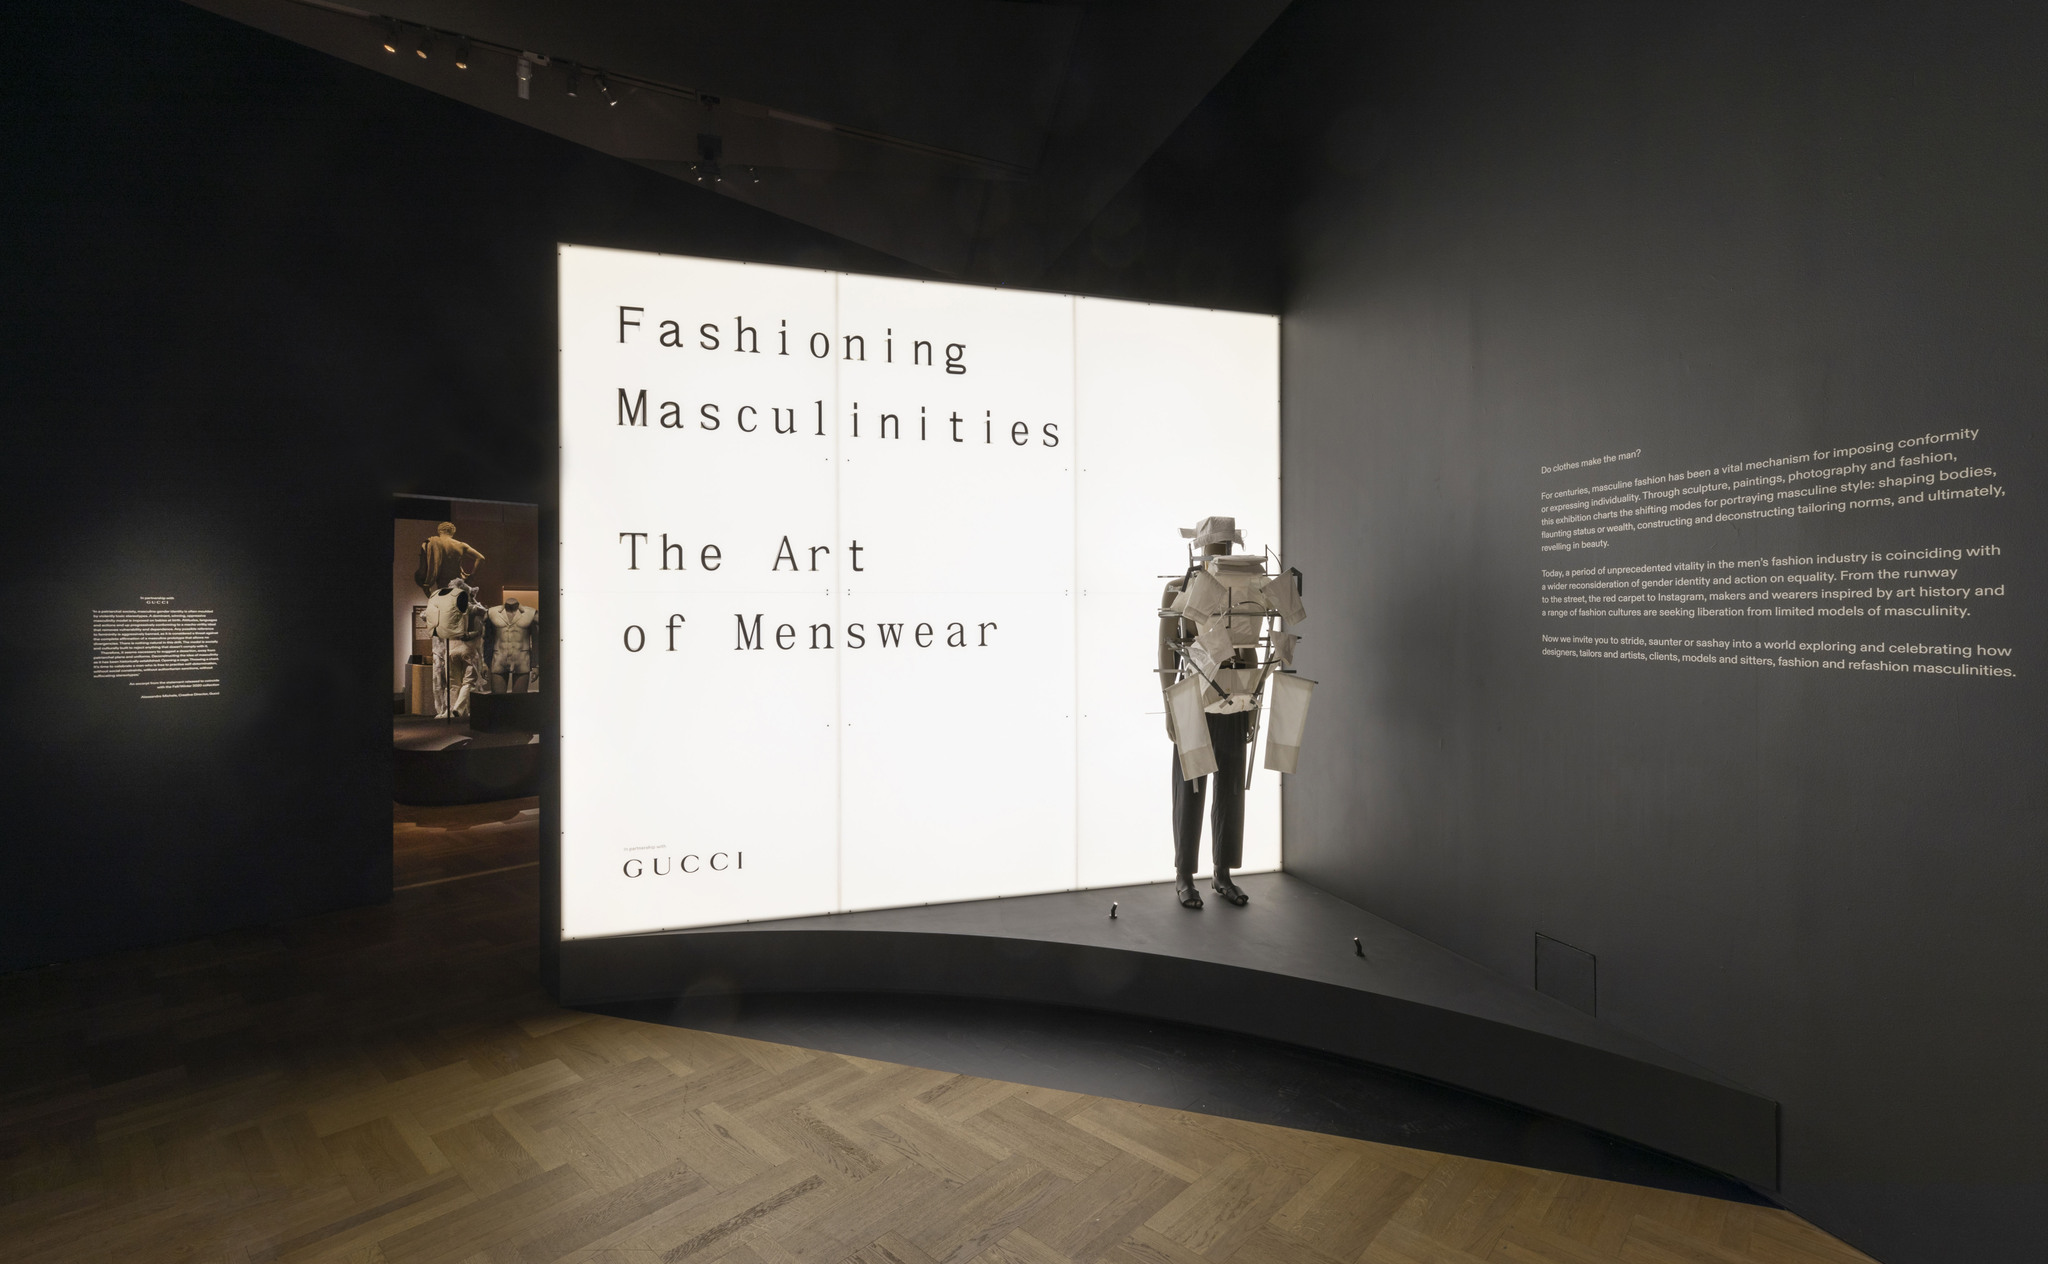 The V&A’s Latest Exhibition Explores Fashion and Masculinity in all its Forms